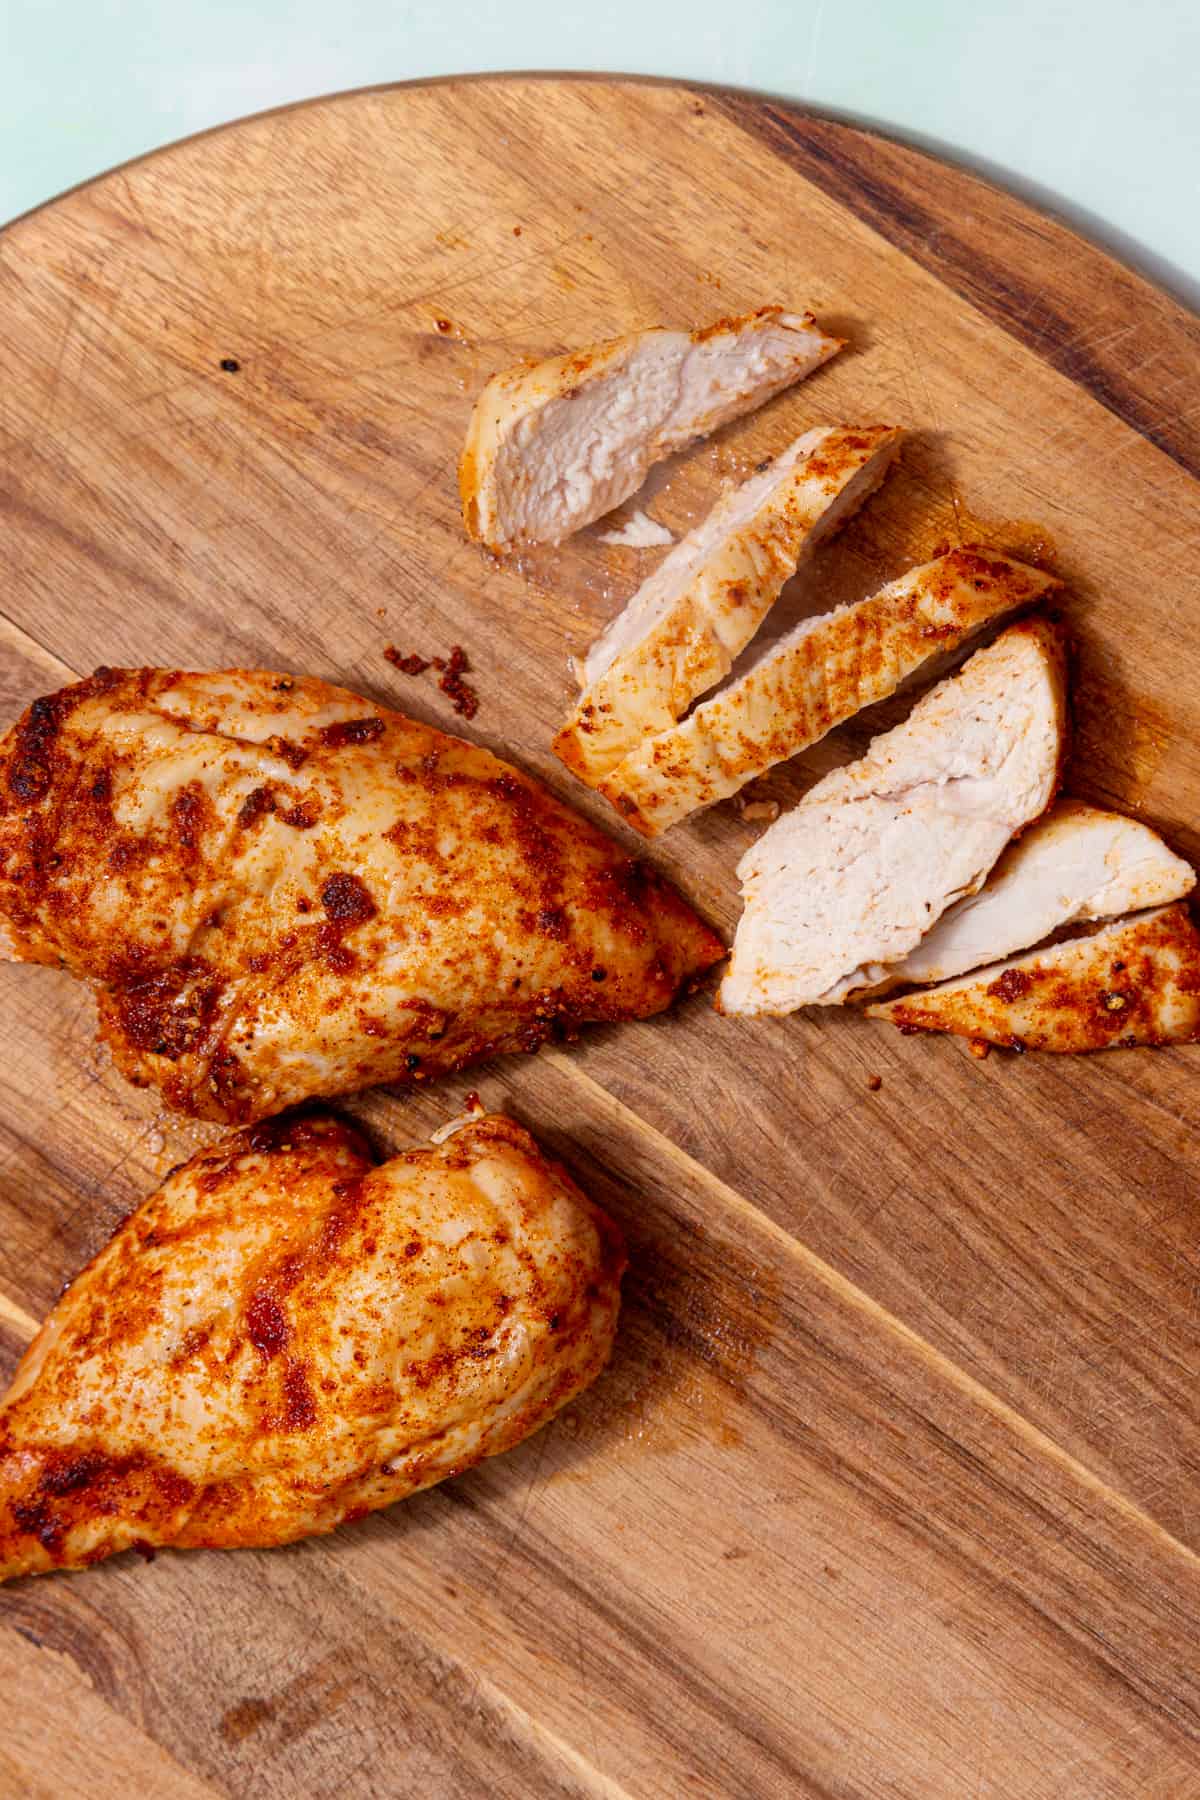 Golden browned, seasoned chicken breast fillets on a wooden board with one piece sliced.